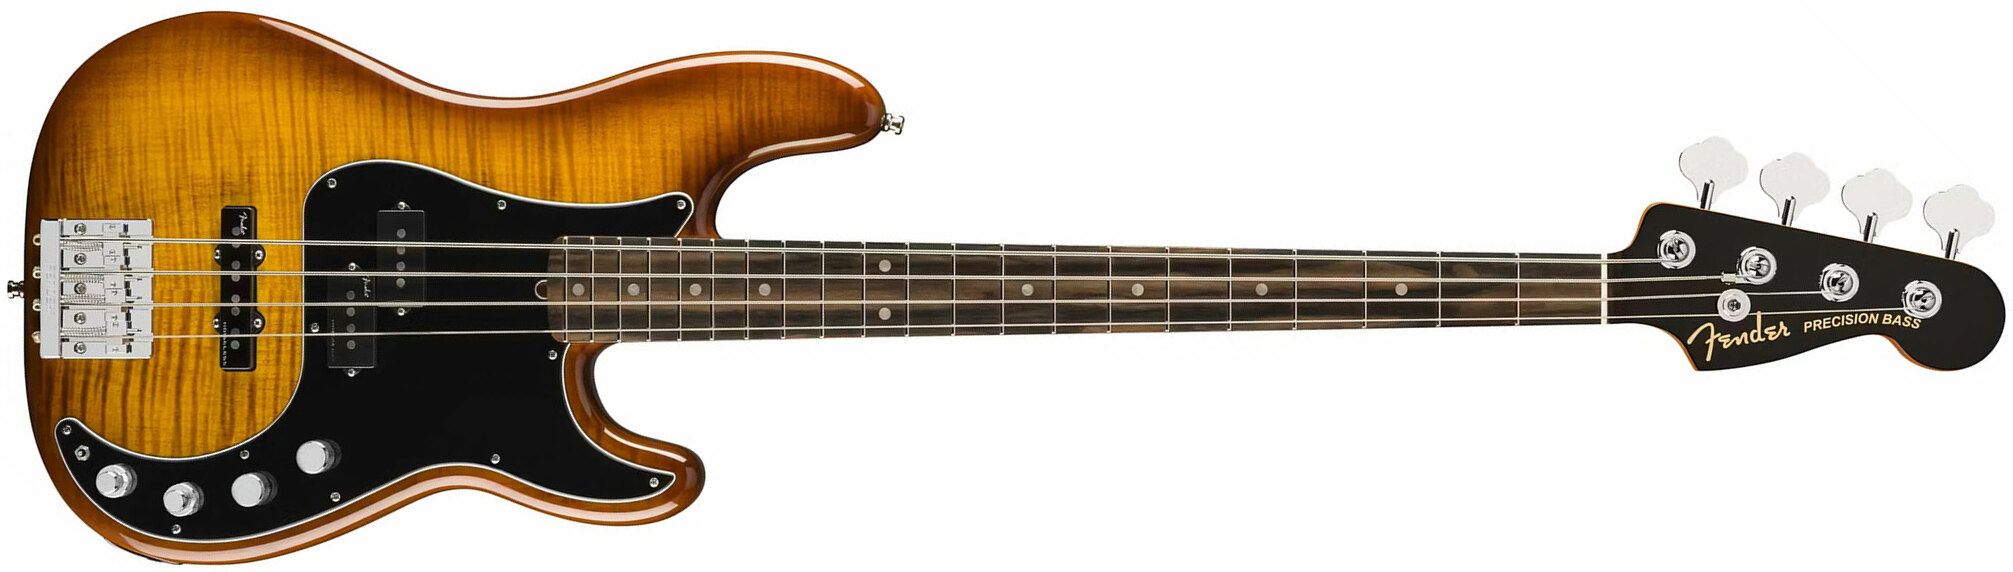 Fender Precision Bass American Ultra Usa Ltd Eb - Tiger's Eye - Basse Électrique Solid Body - Main picture